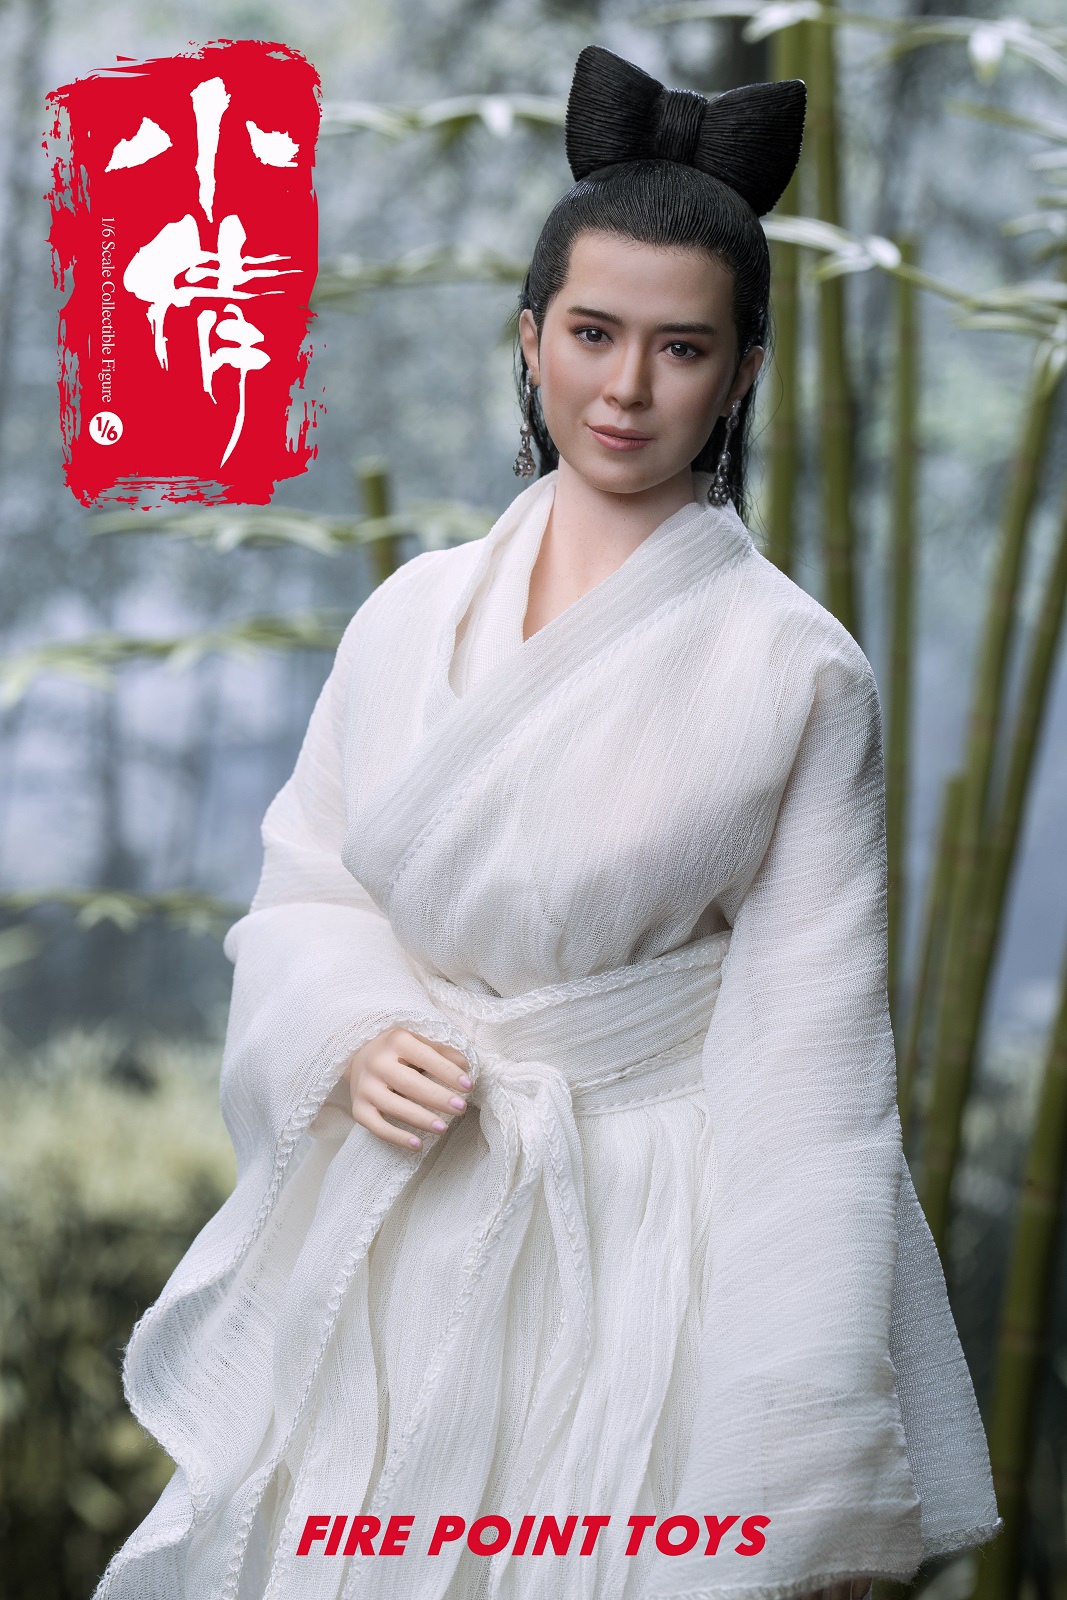 FirePointToys - NEW PRODUCT: Fire Point Toys - Xiaoqian (FPT003) 10141